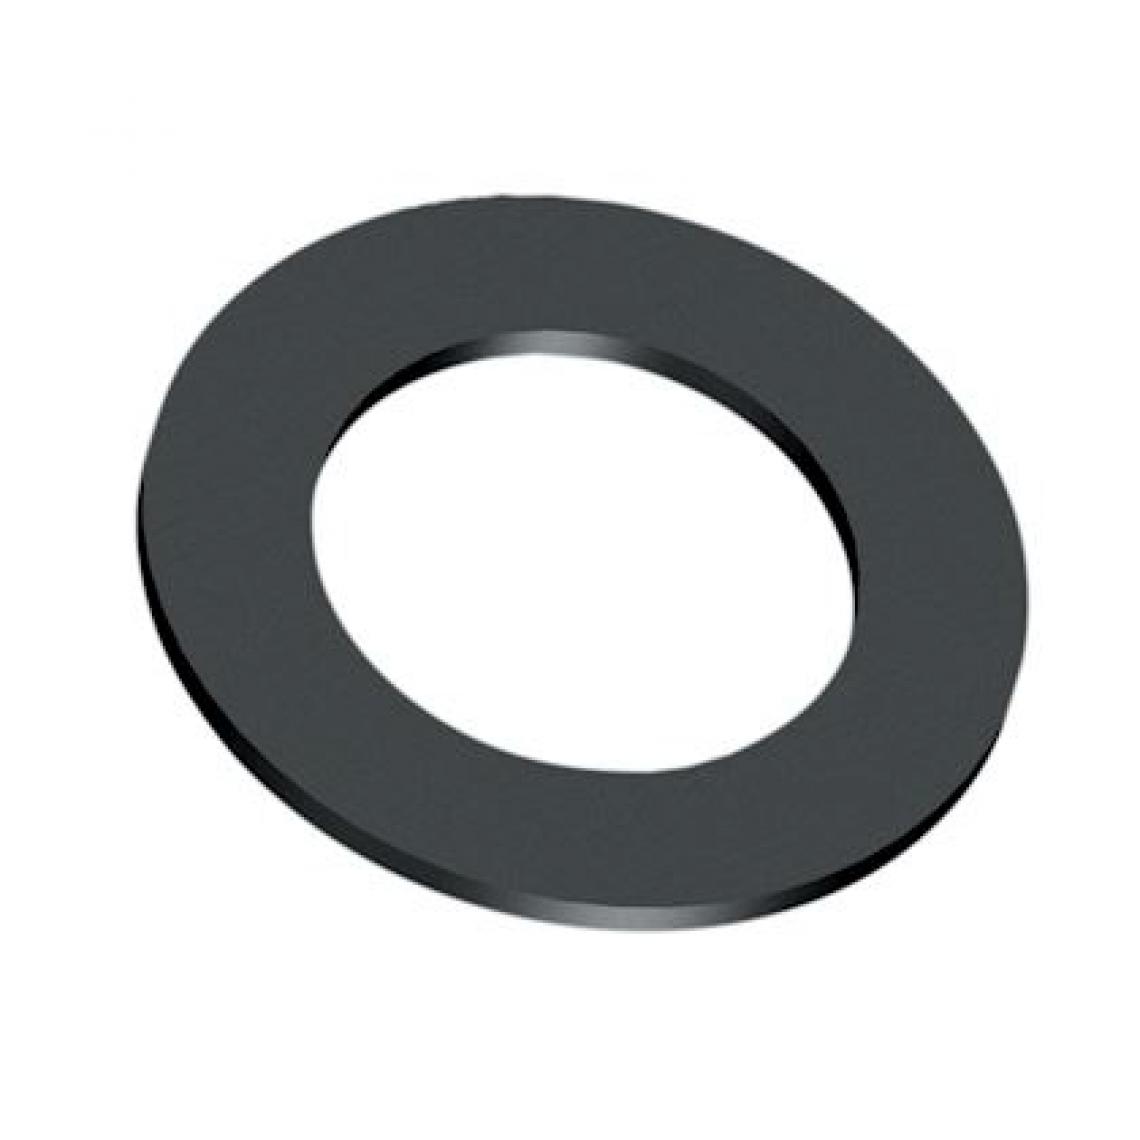 Watts Industries - joint - epdm - 20 x 27 - boite de 100 - watts industries 171402 - Mastic, silicone, joint